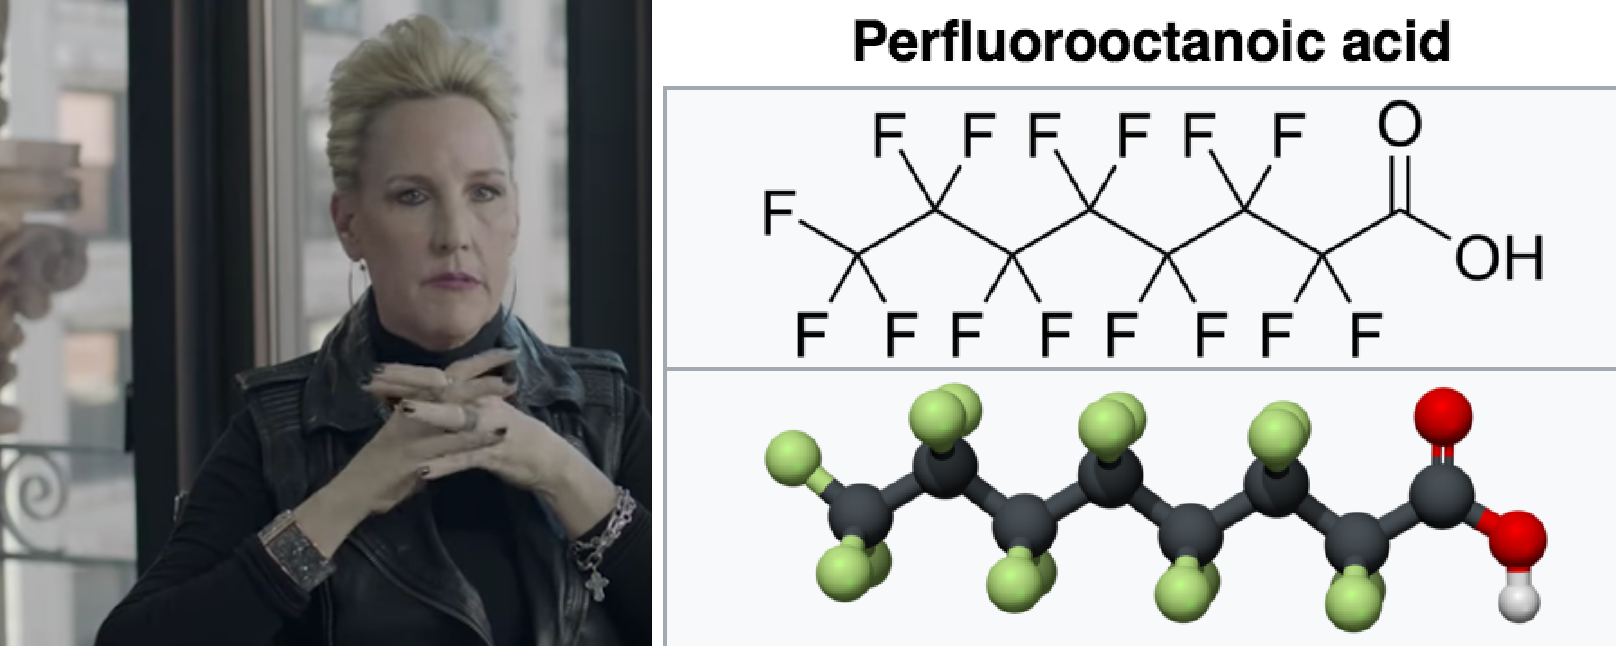 DuPont Poisoned 99.7% of Americans With Teflon Chemicals; Erin Brockovich, Filmmakers Fight Back